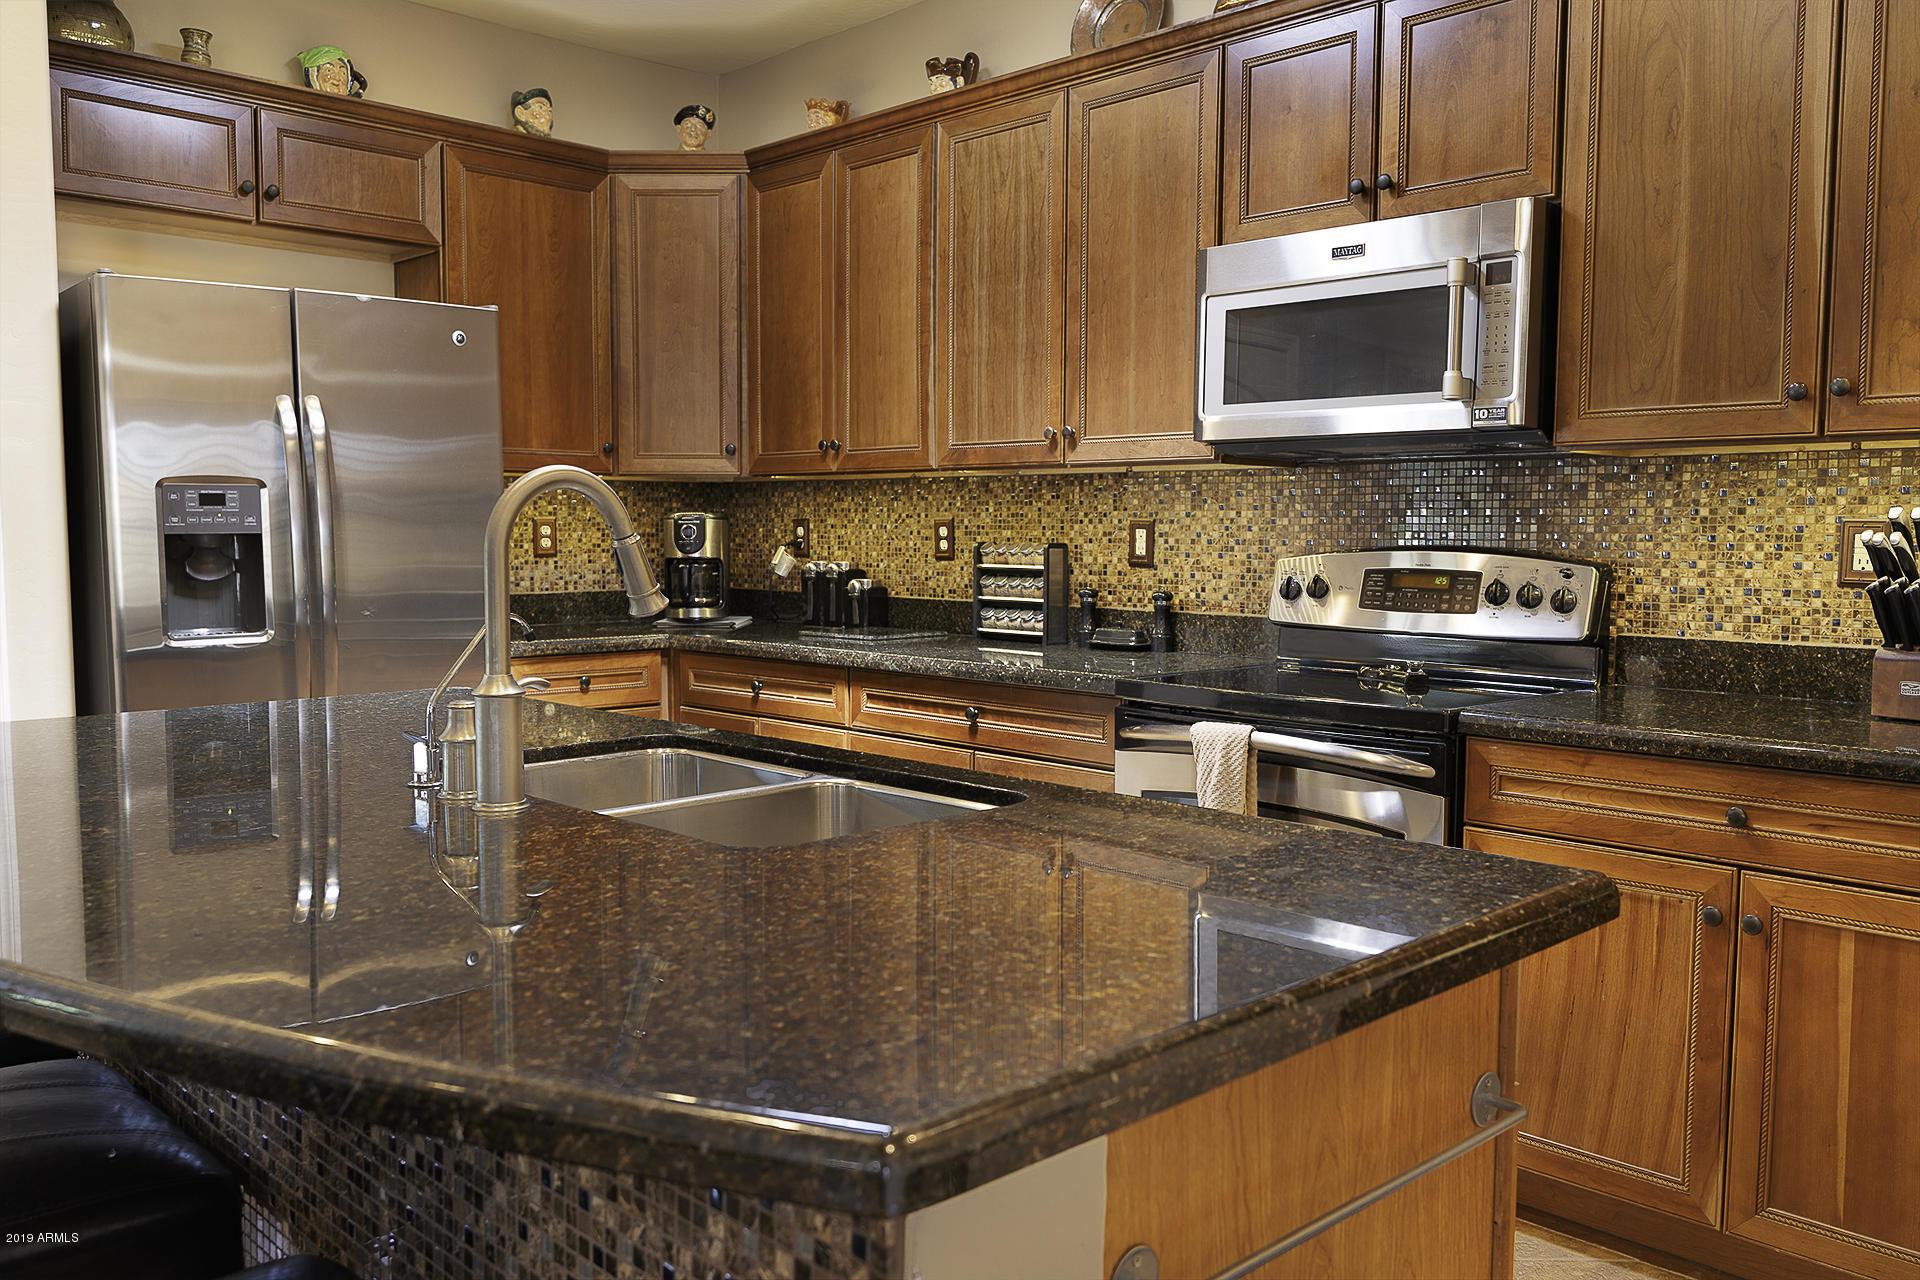 A classic kitchen interior with granite countertops and wooden kitchen cabinets around the kitchen wall.